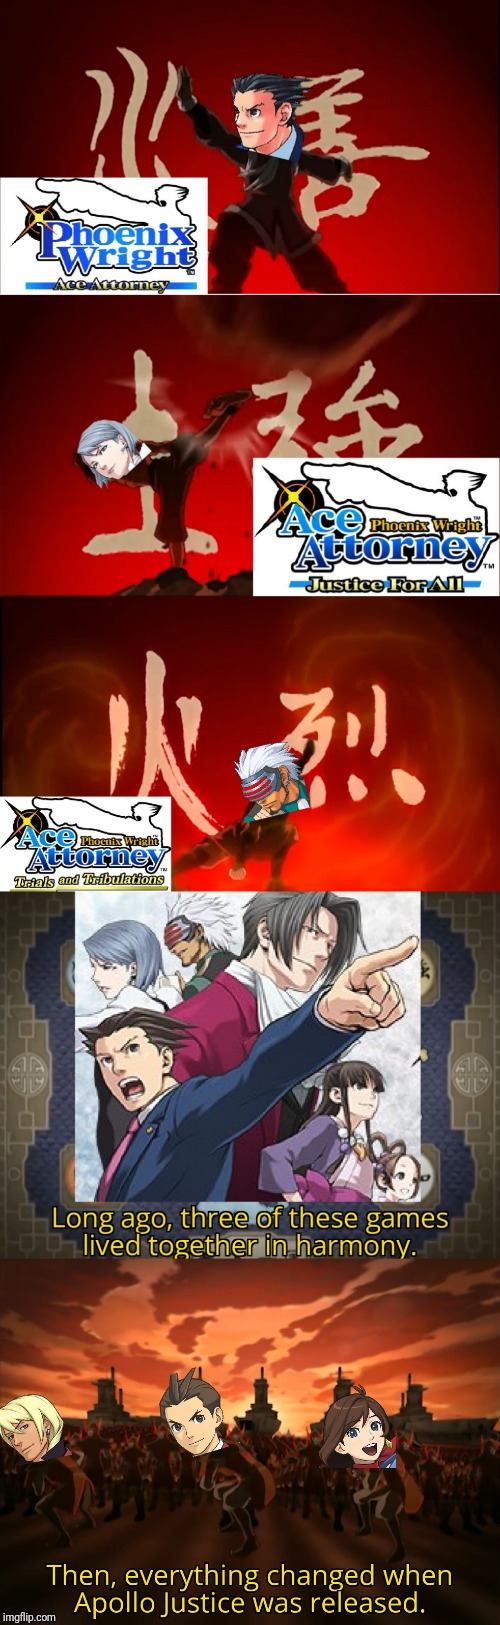 The AA Fandom Changed | image tagged in ace attorney,apollo justice,phoenix wright,avatar the last airbender,fire nation | made w/ Imgflip meme maker